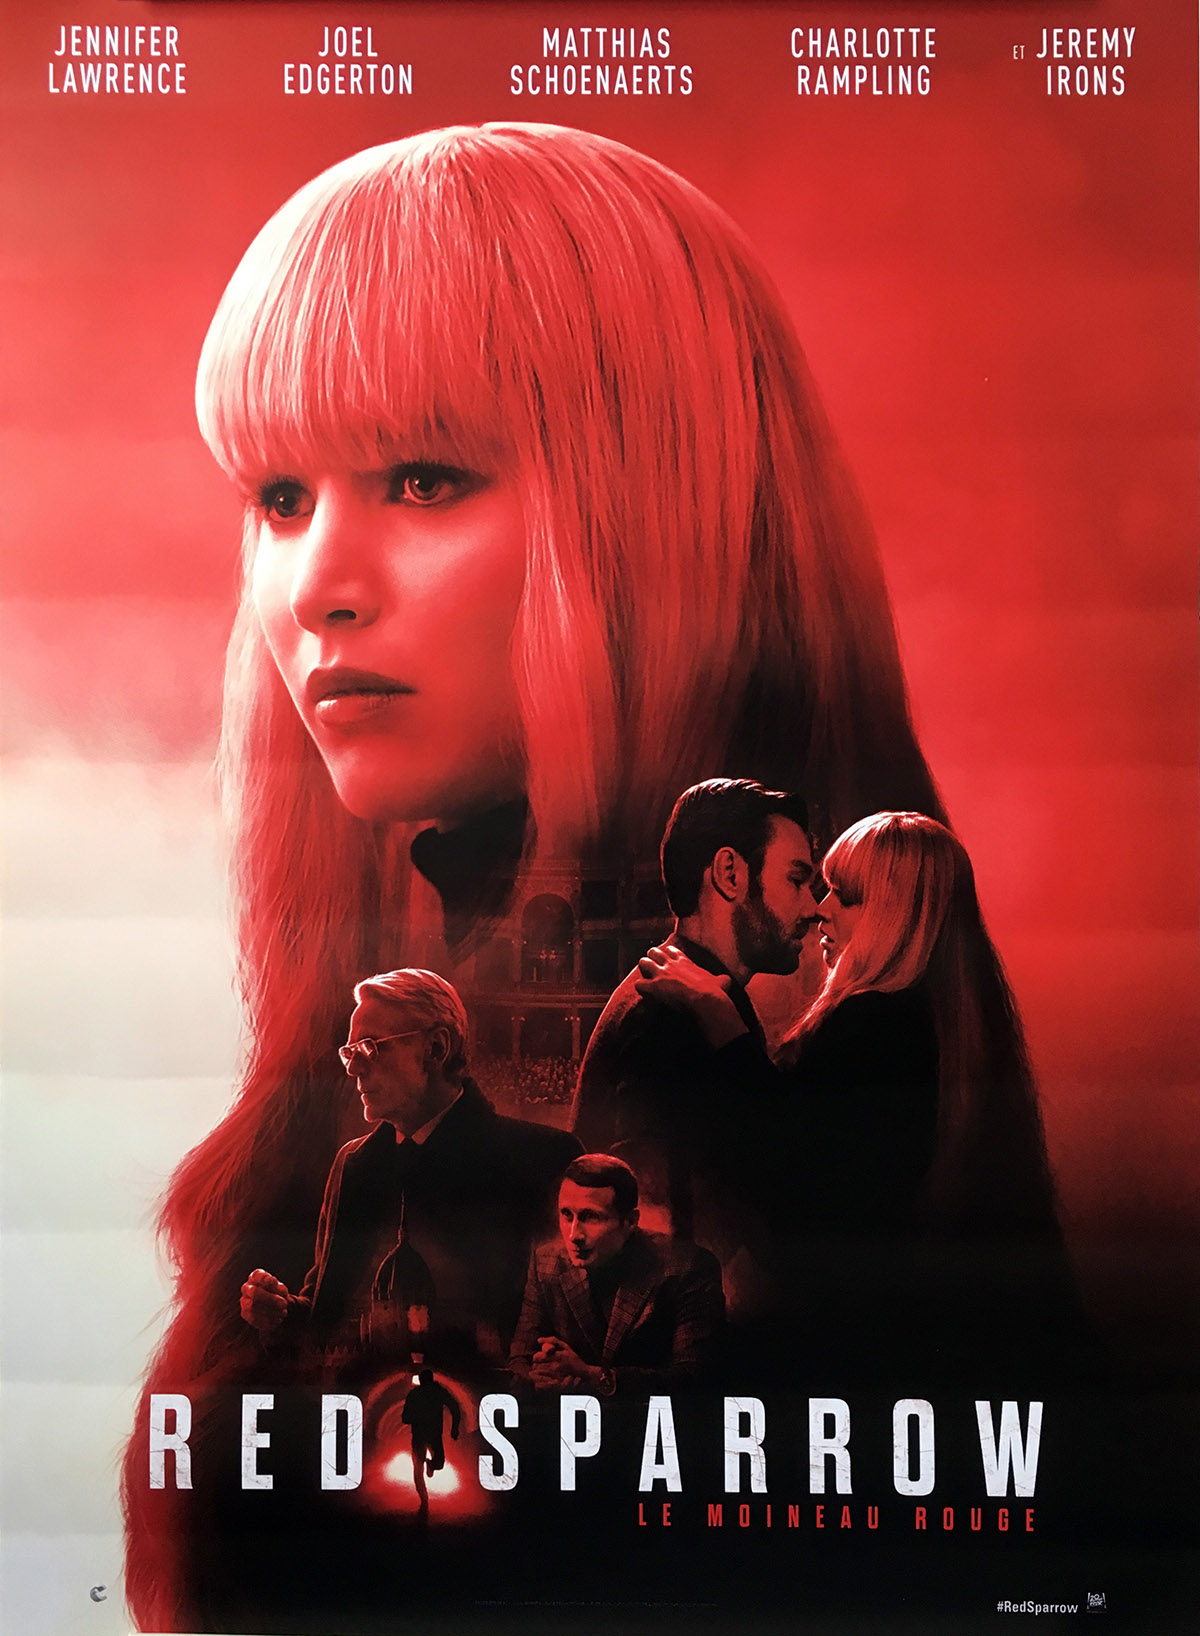 red-sparrow-original-movie-poster-15x21-in-2018-francis-lawrence-jennifer-lawrence.jpg